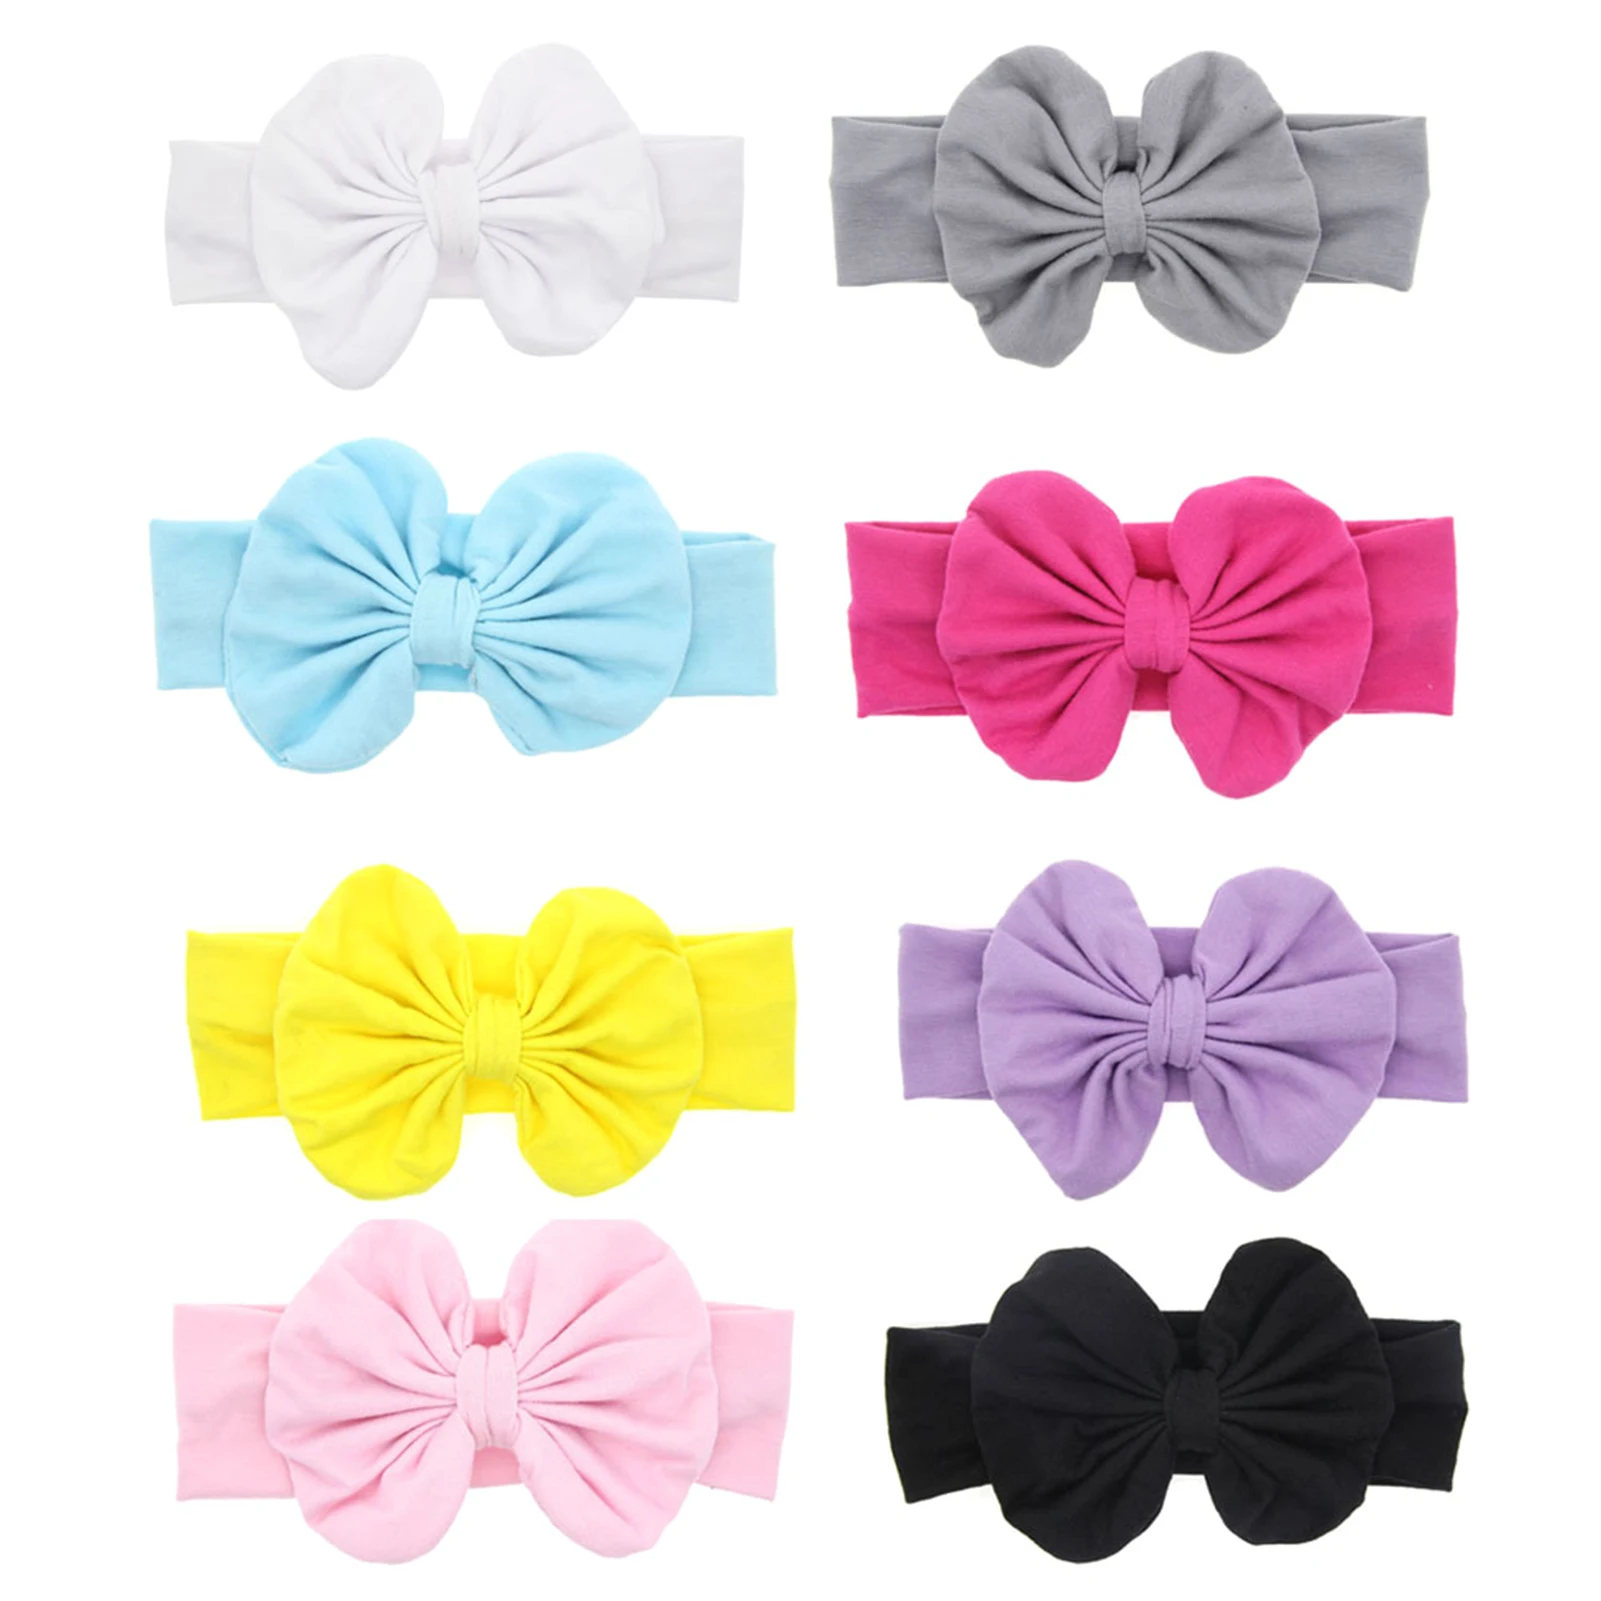 

8pcs Girl Gift Party Dress Up Cute Bowknot Birthday Solid Elastic Photography Baby Headband Hair Band Headwrap Photo Prop Daily